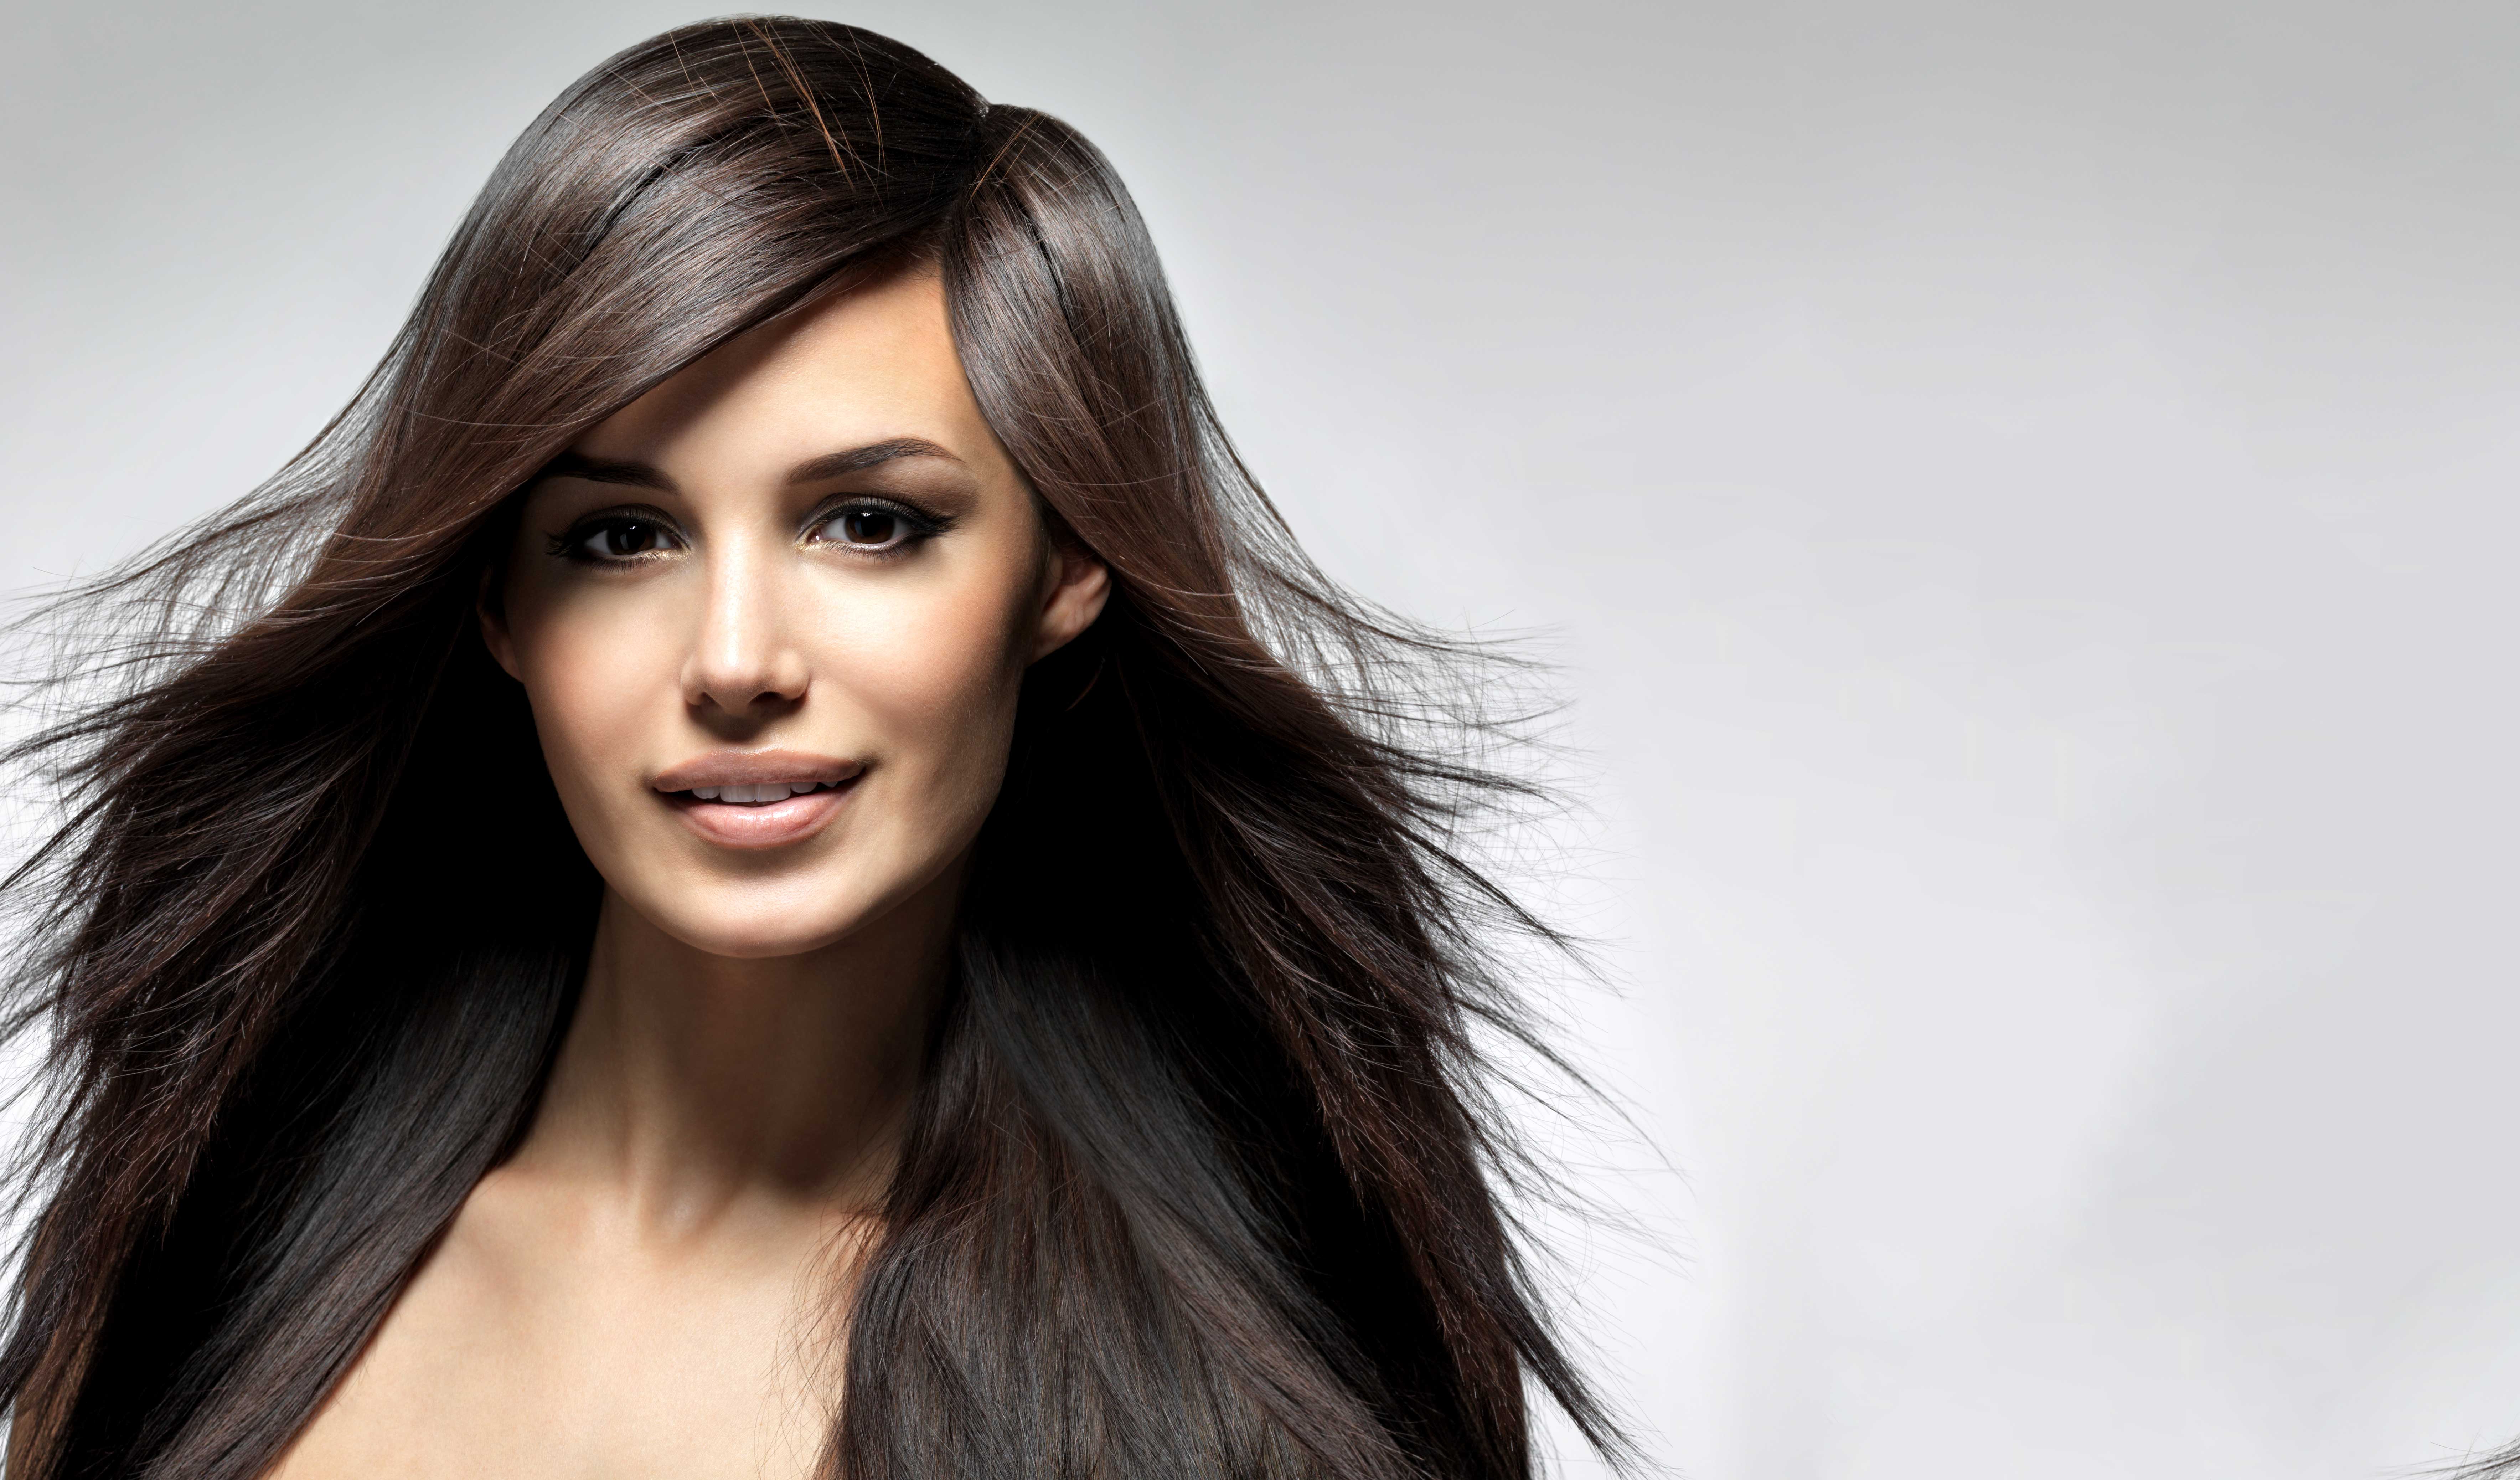 Women Hairstyle Wallpapers Wallpaper Cave